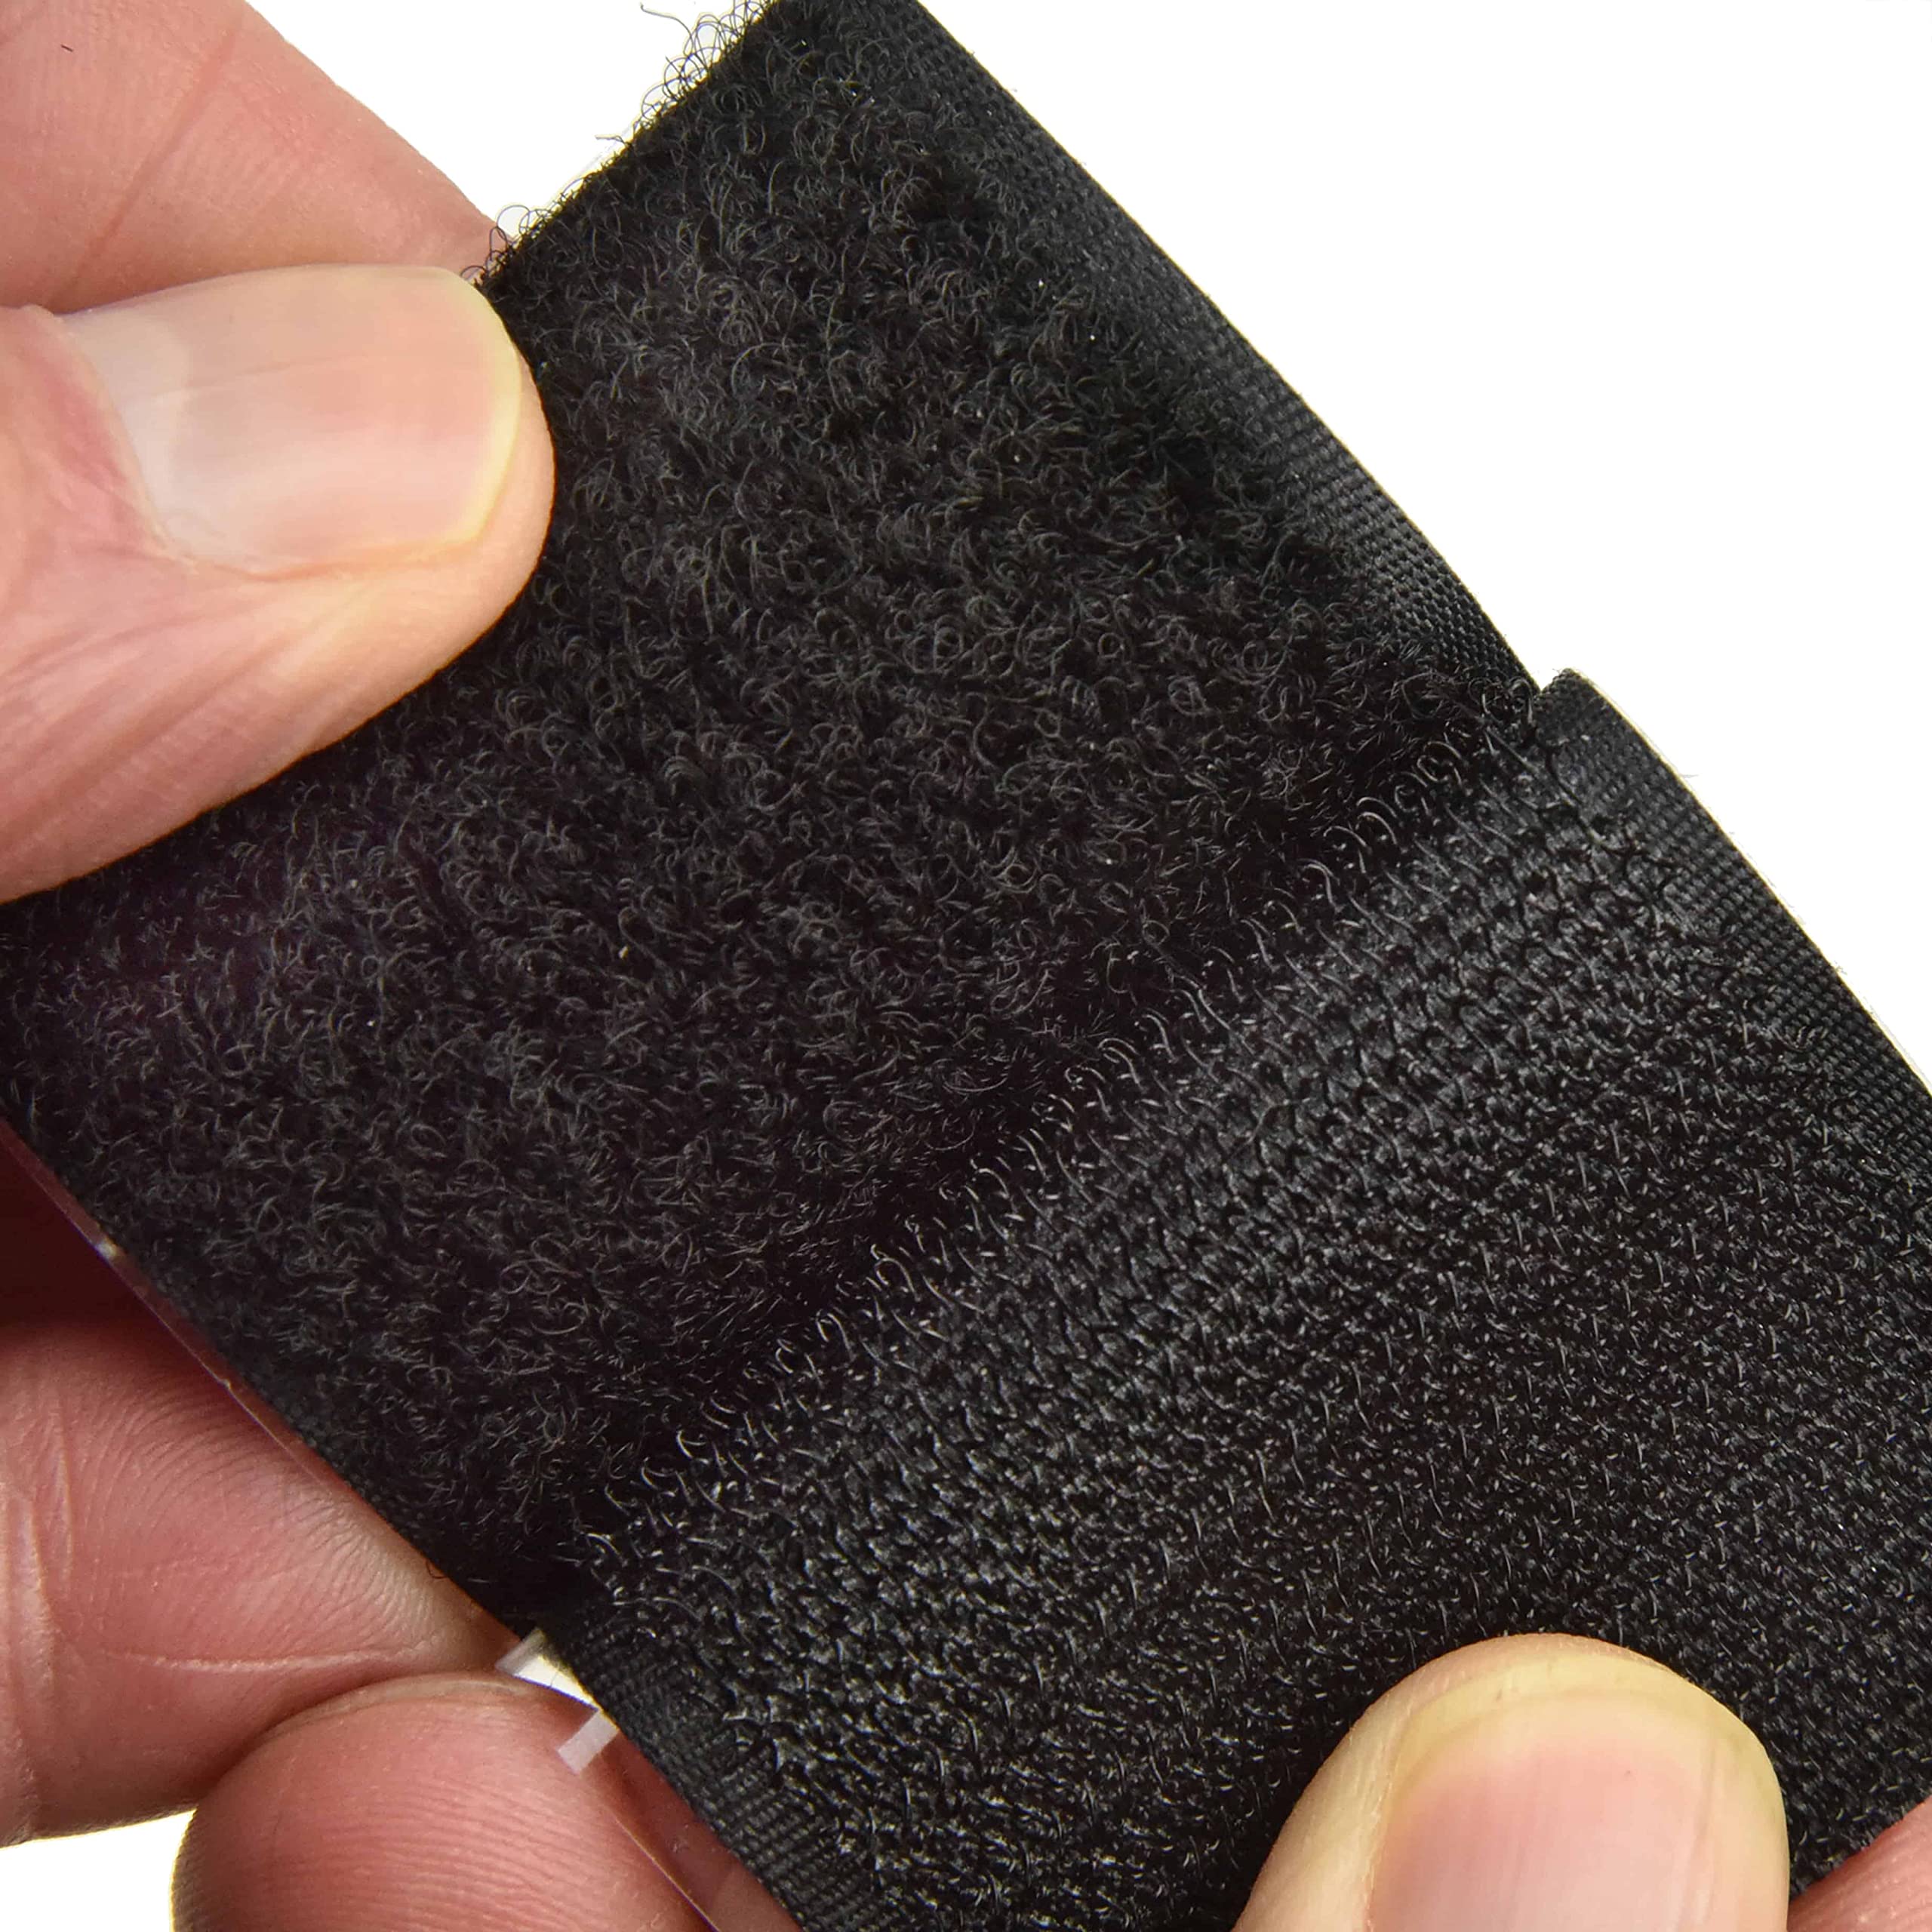 VELCRO Brand Heavy Duty Tape with Adhesive, 2 Inches X 5 feet, Black